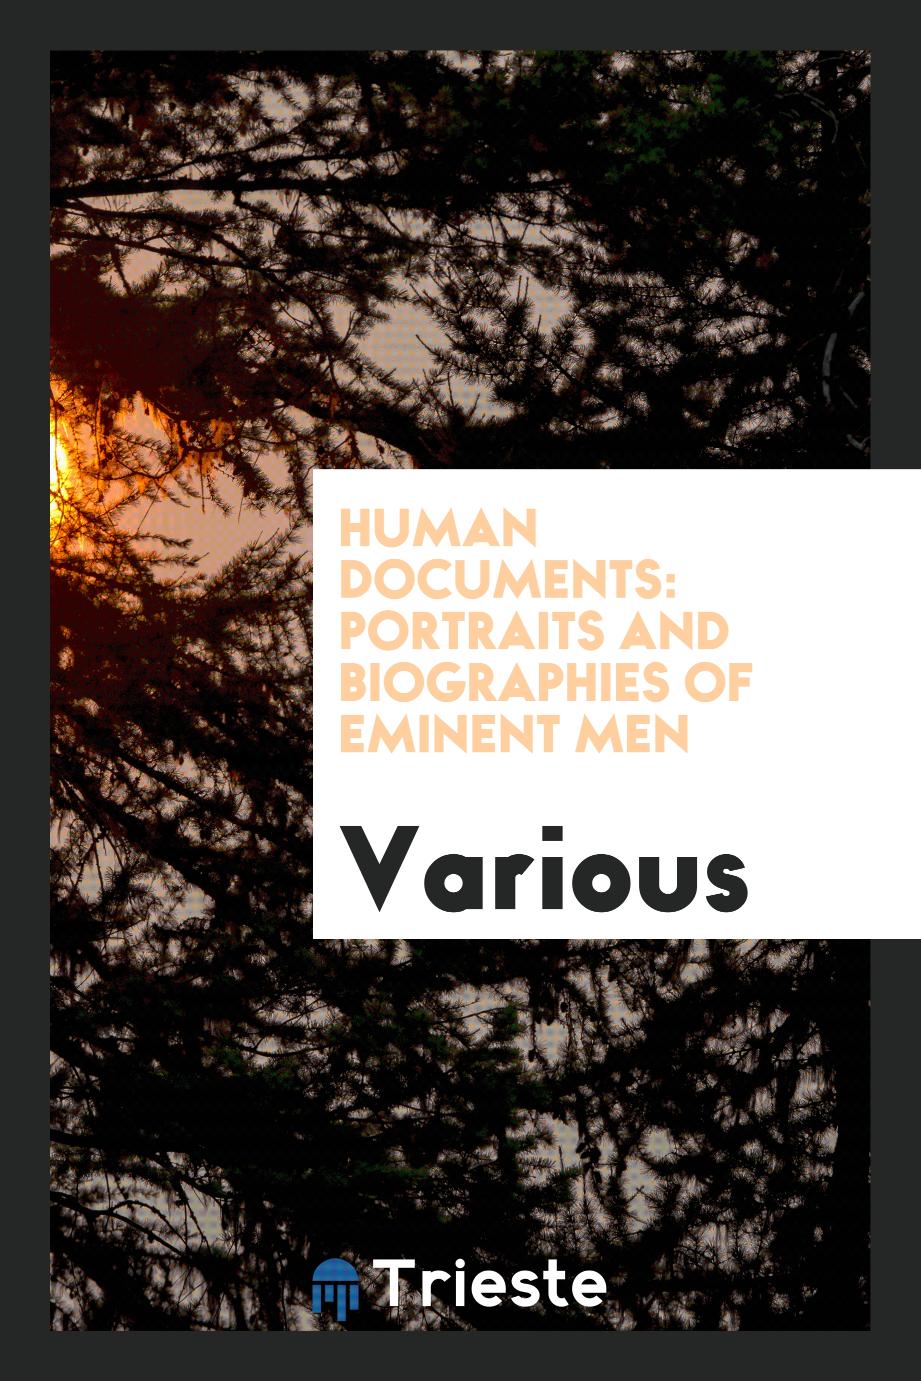 Human Documents: Portraits and Biographies of Eminent Men